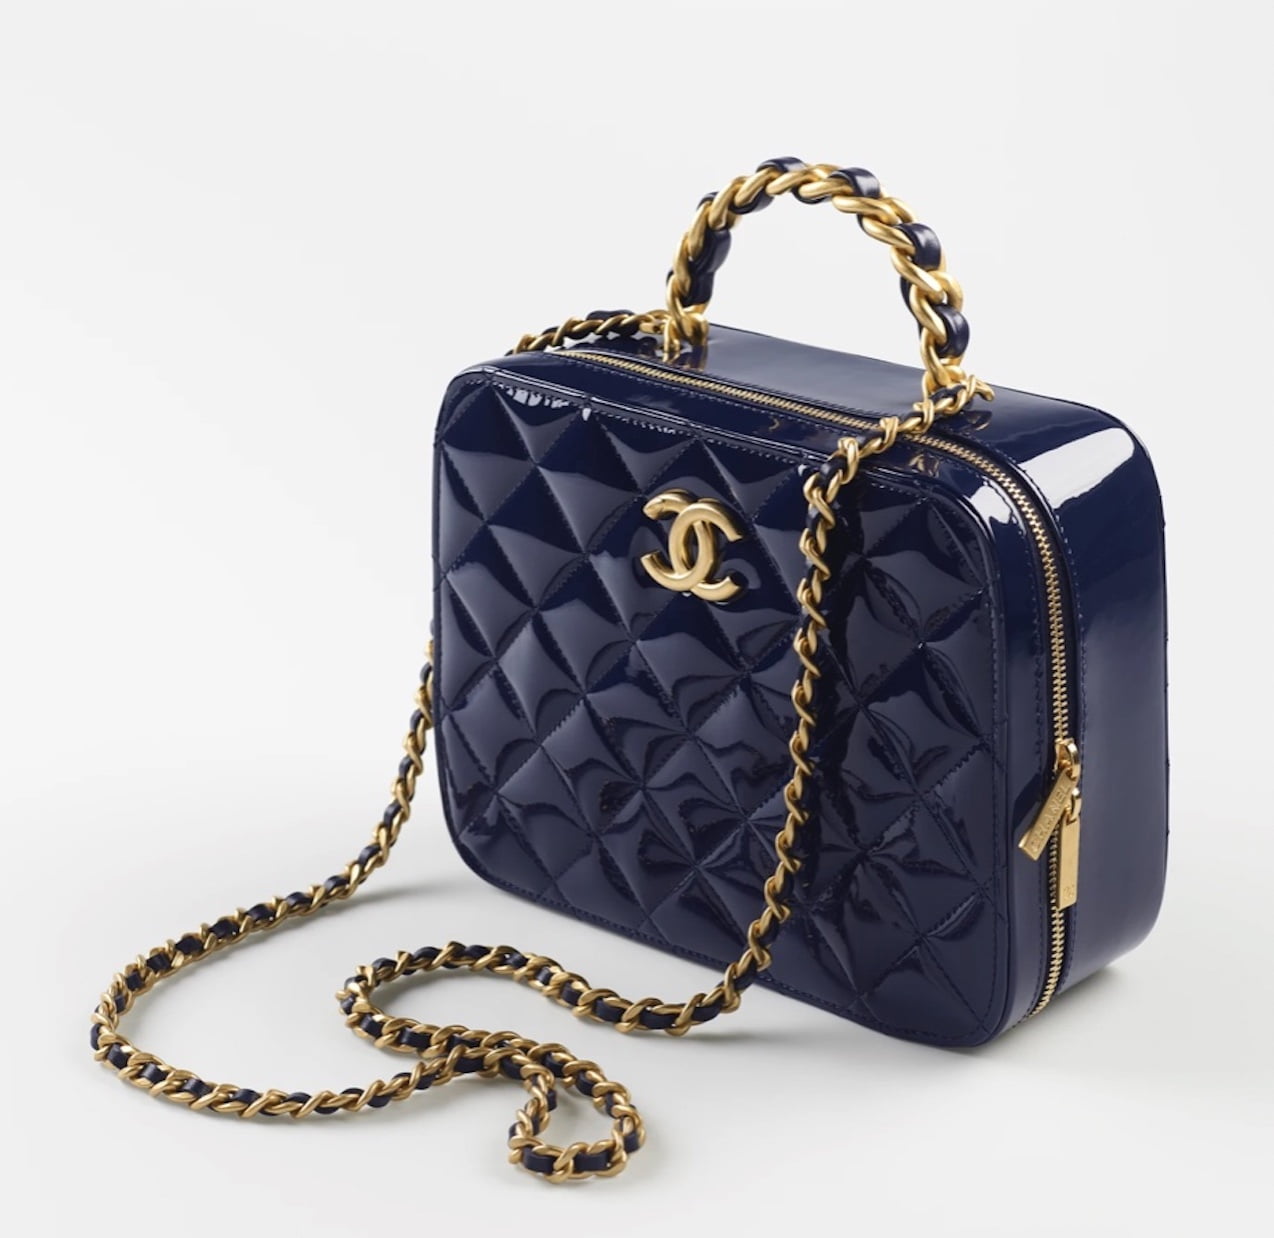 Learn All About One of This Season's Hottest Bags: The Chanel 22 - The Vault